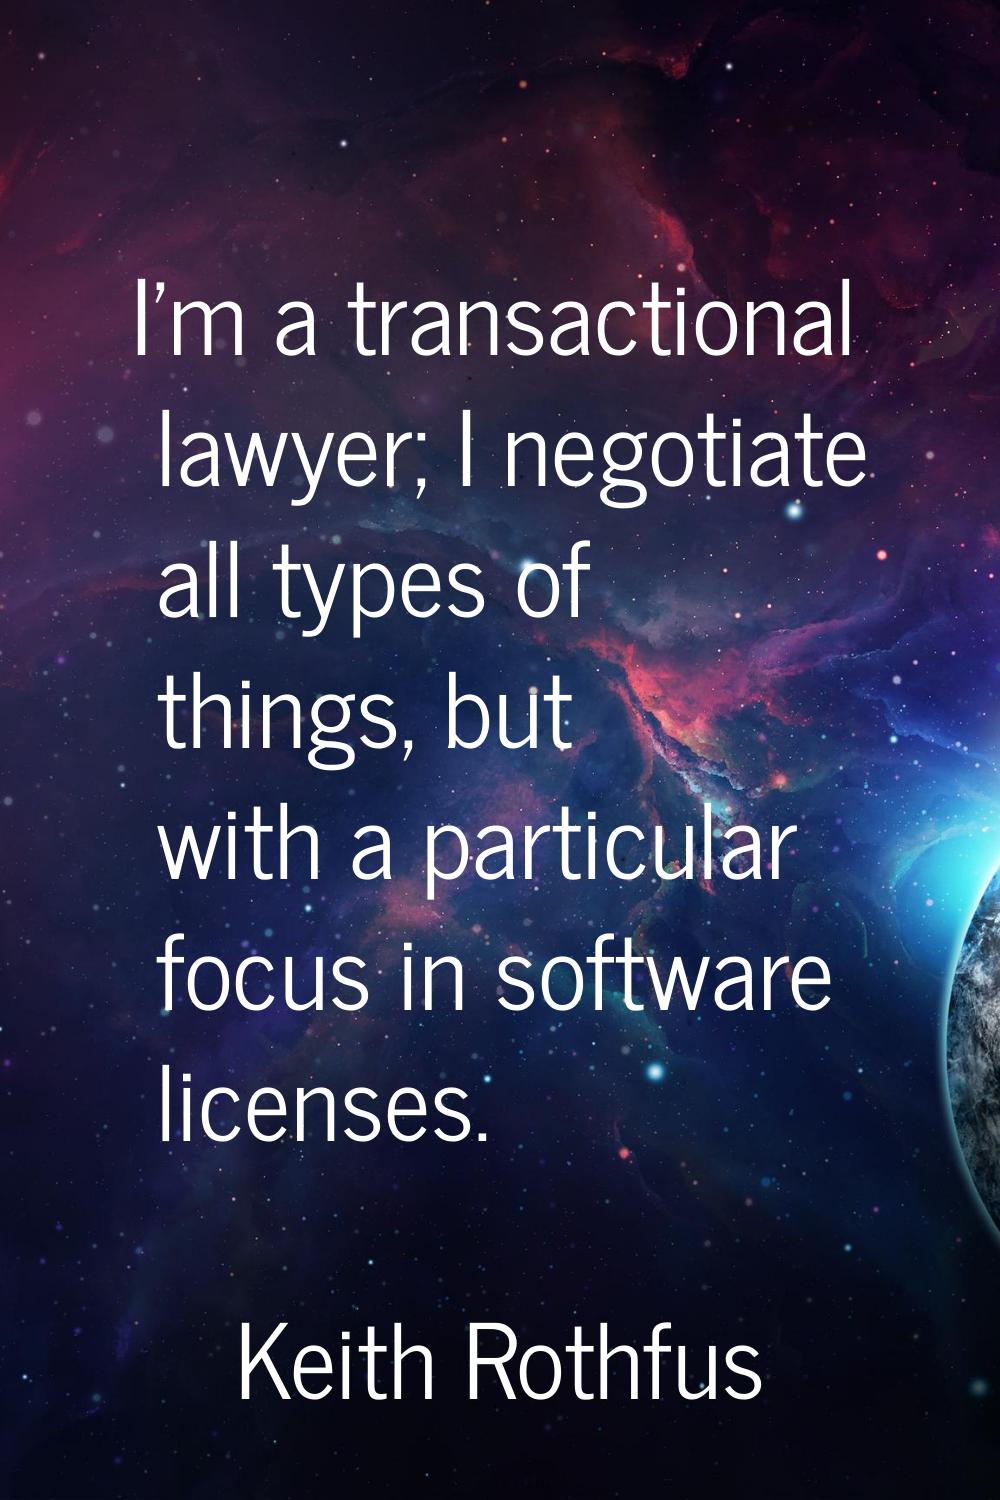 I'm a transactional lawyer; I negotiate all types of things, but with a particular focus in softwar